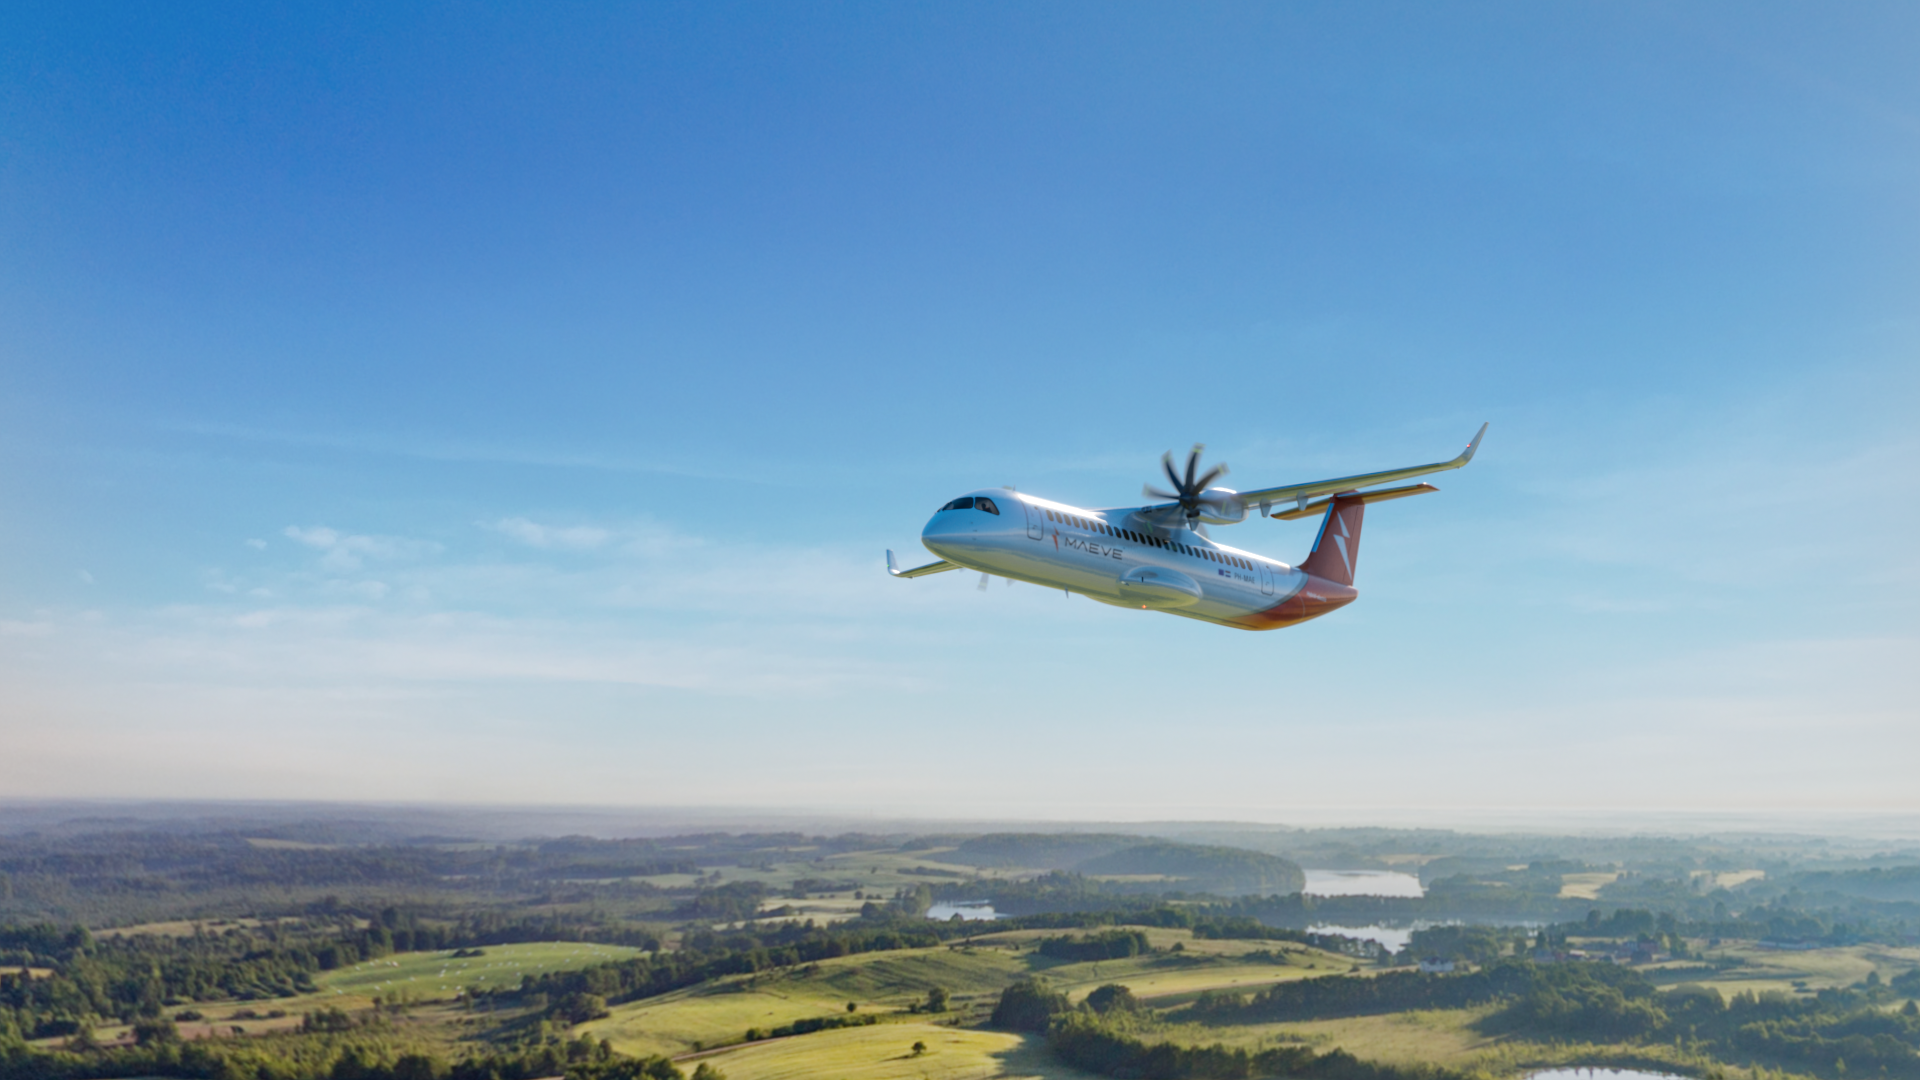 The Efficiency of a Turboprop, the Performance of a Jet: Meet Maeve’s M80